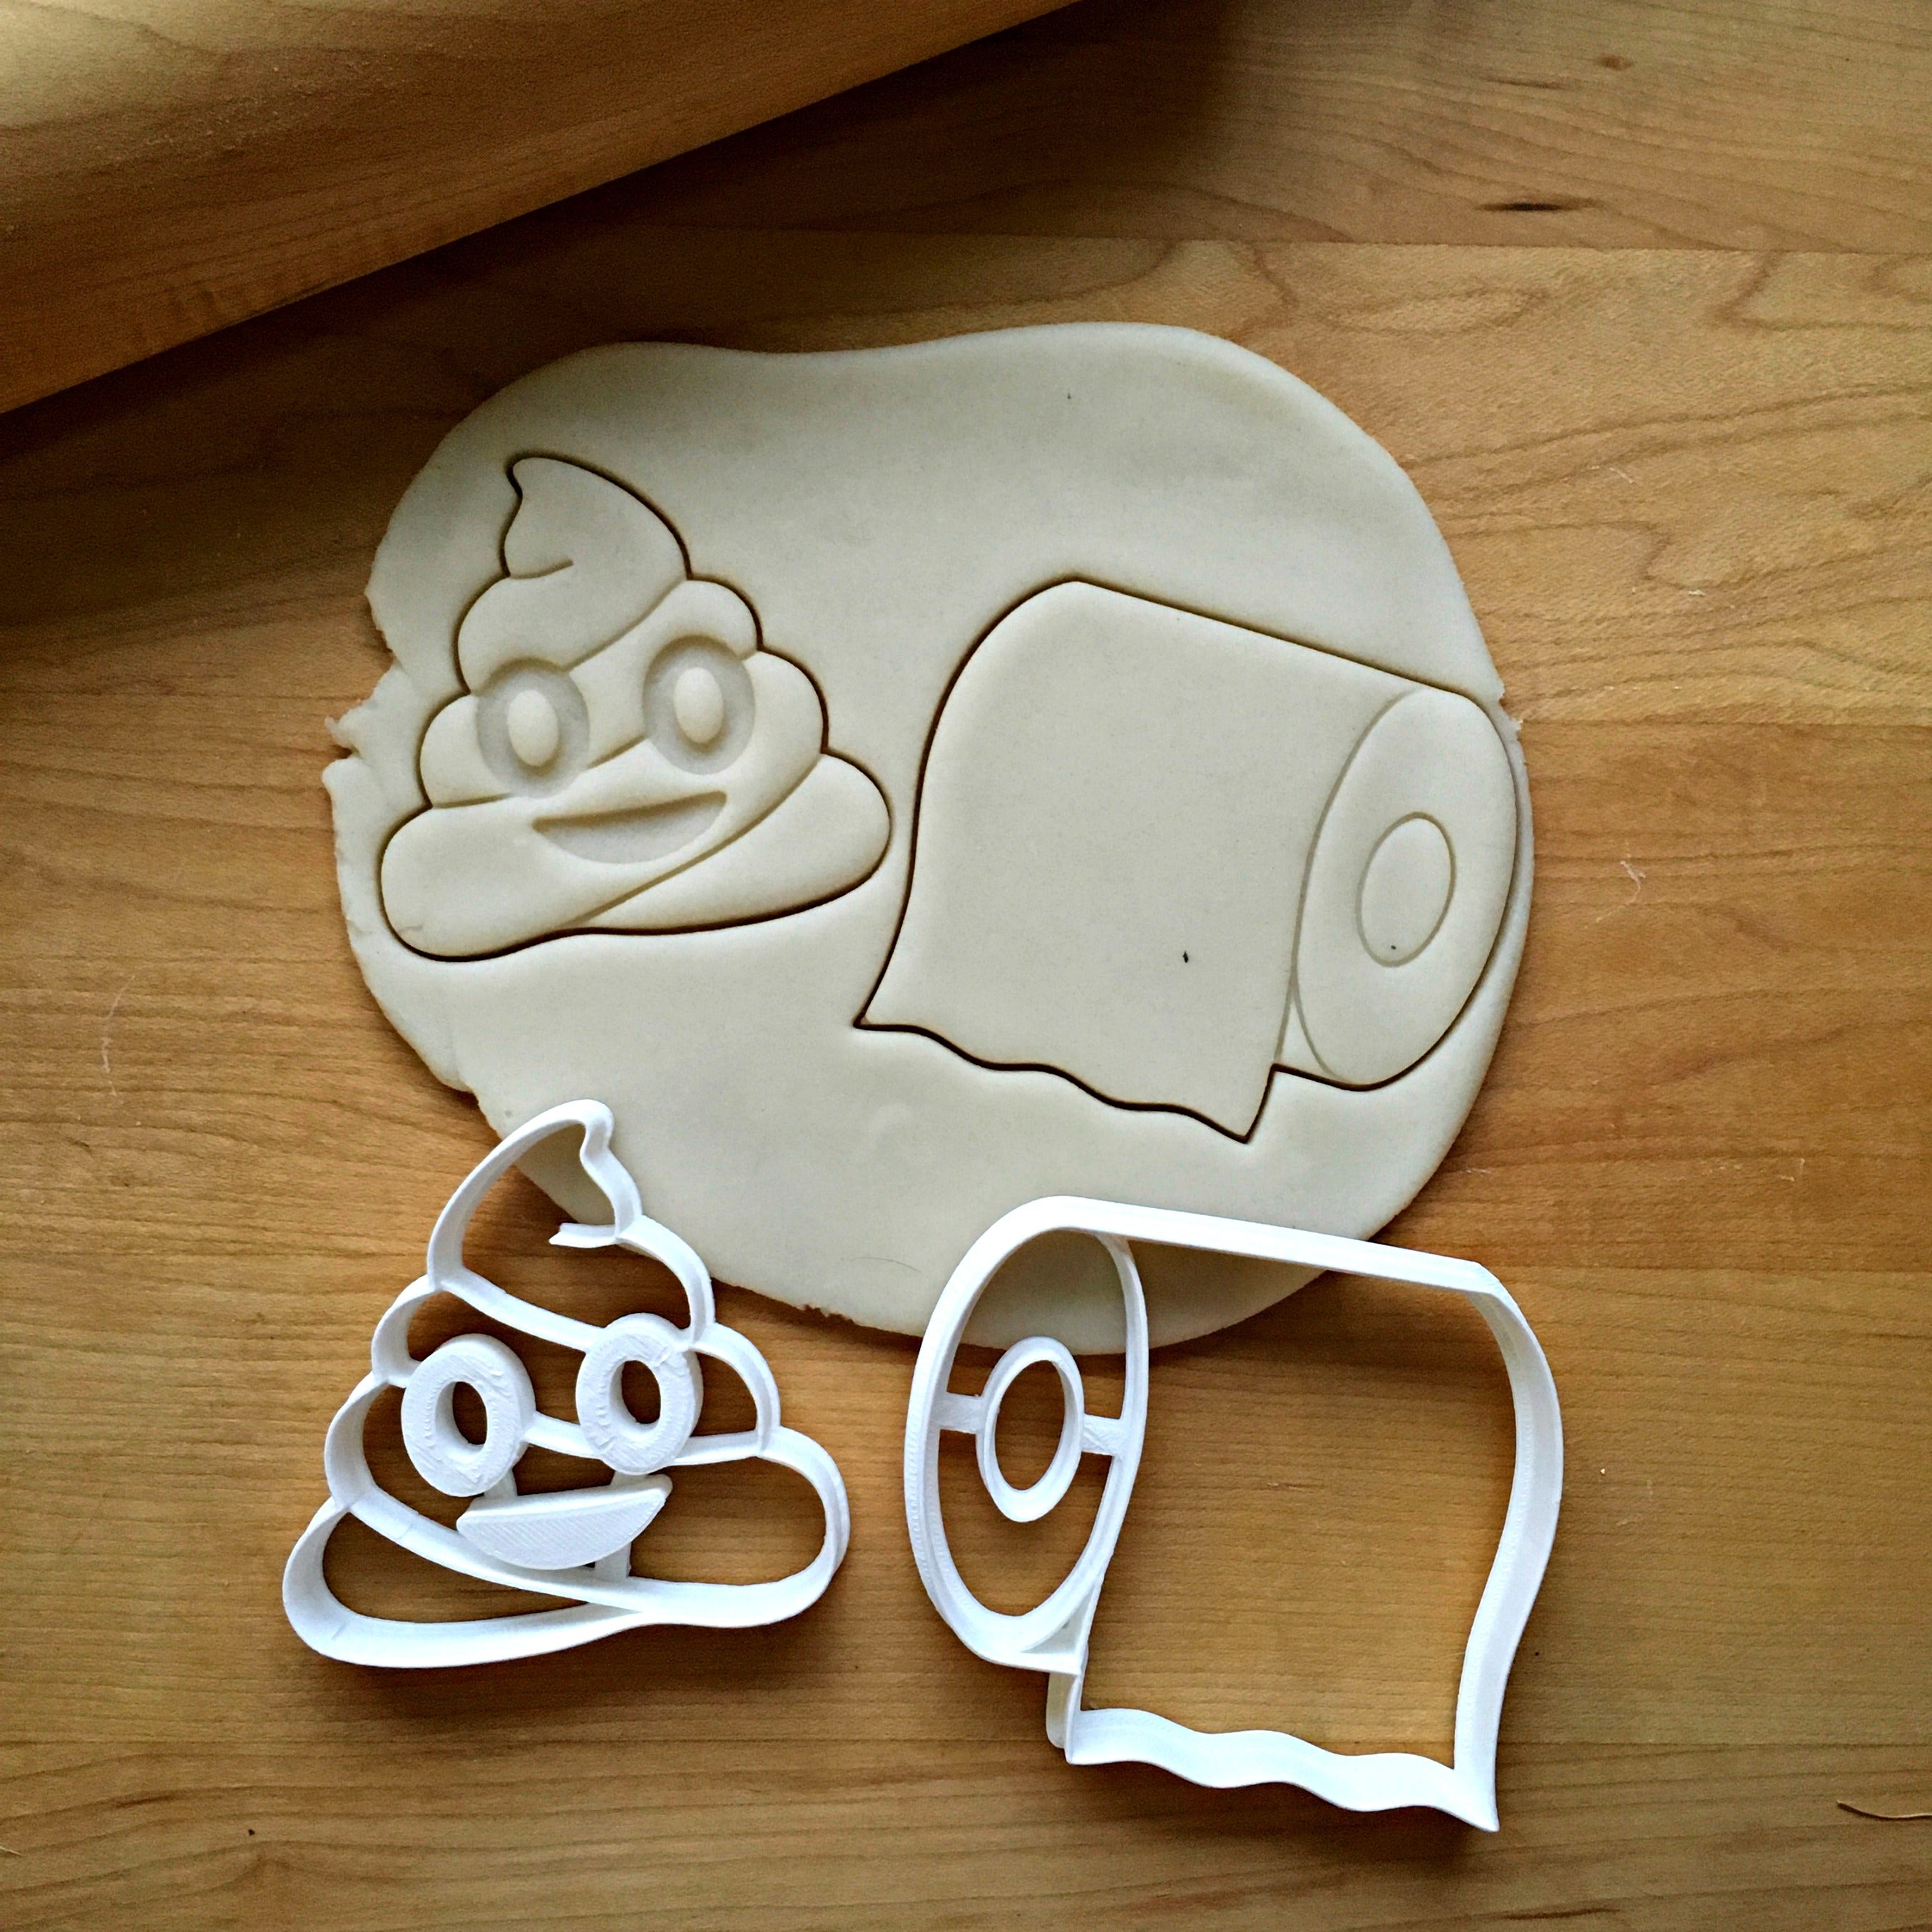 Set of 2 Poop Emoji and Toilet Paper Roll Cookie Cutters/Dishwasher Safe